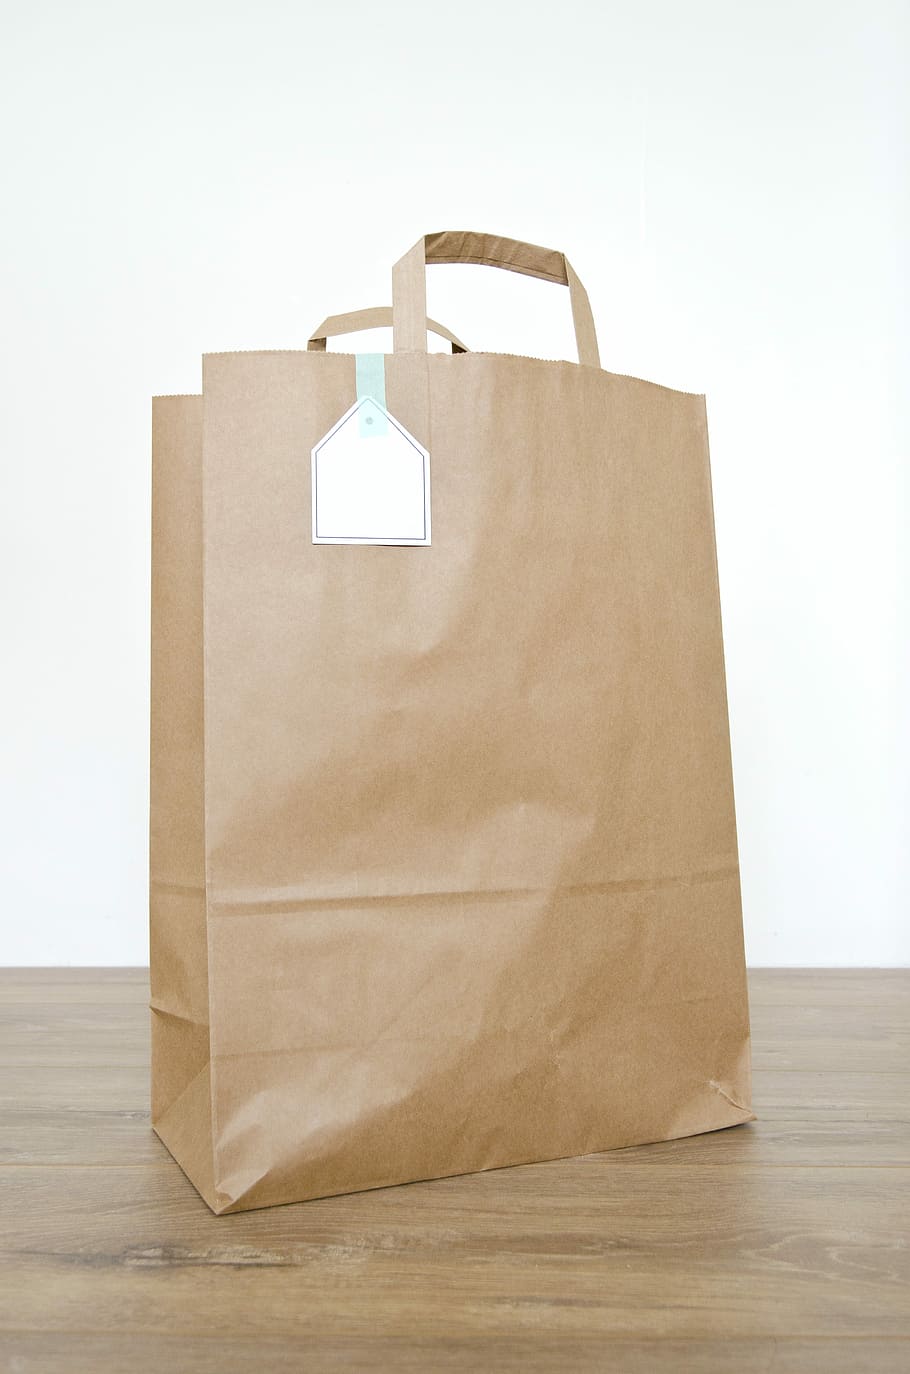 brown, paper bag, wooden, surface, bag, brown paper bag, paper, blank, container, kraft